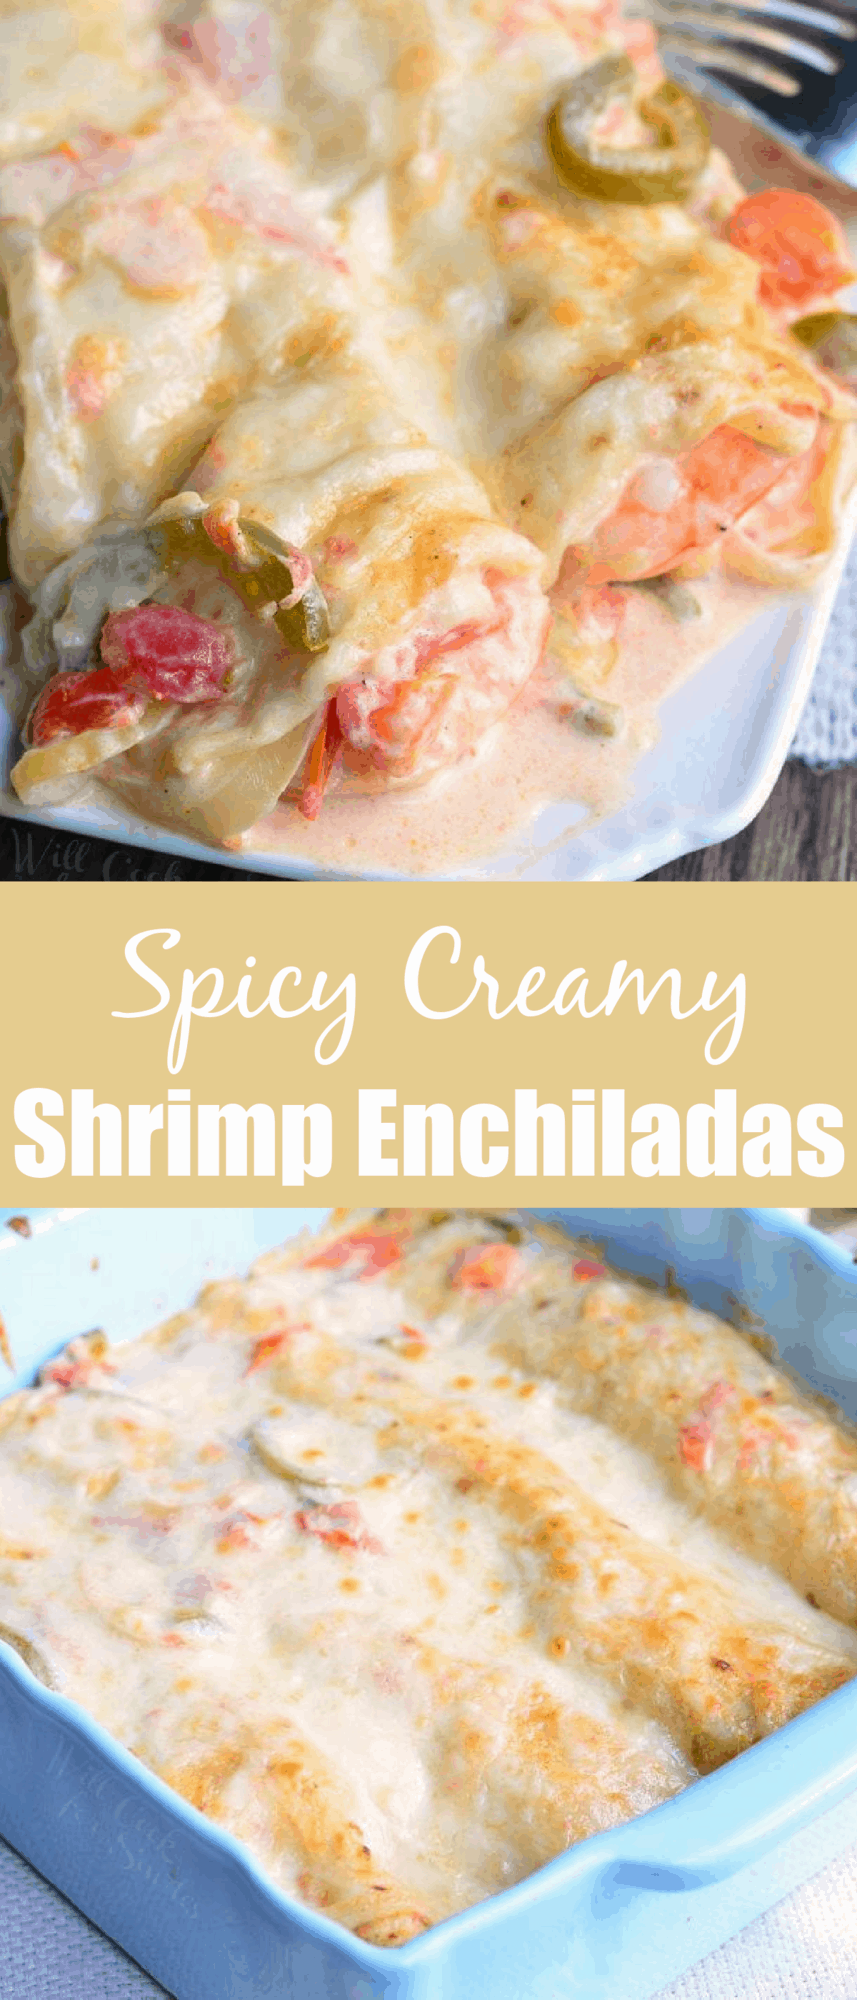 collage title image of creamy enchiladas with shrimp and vegetables